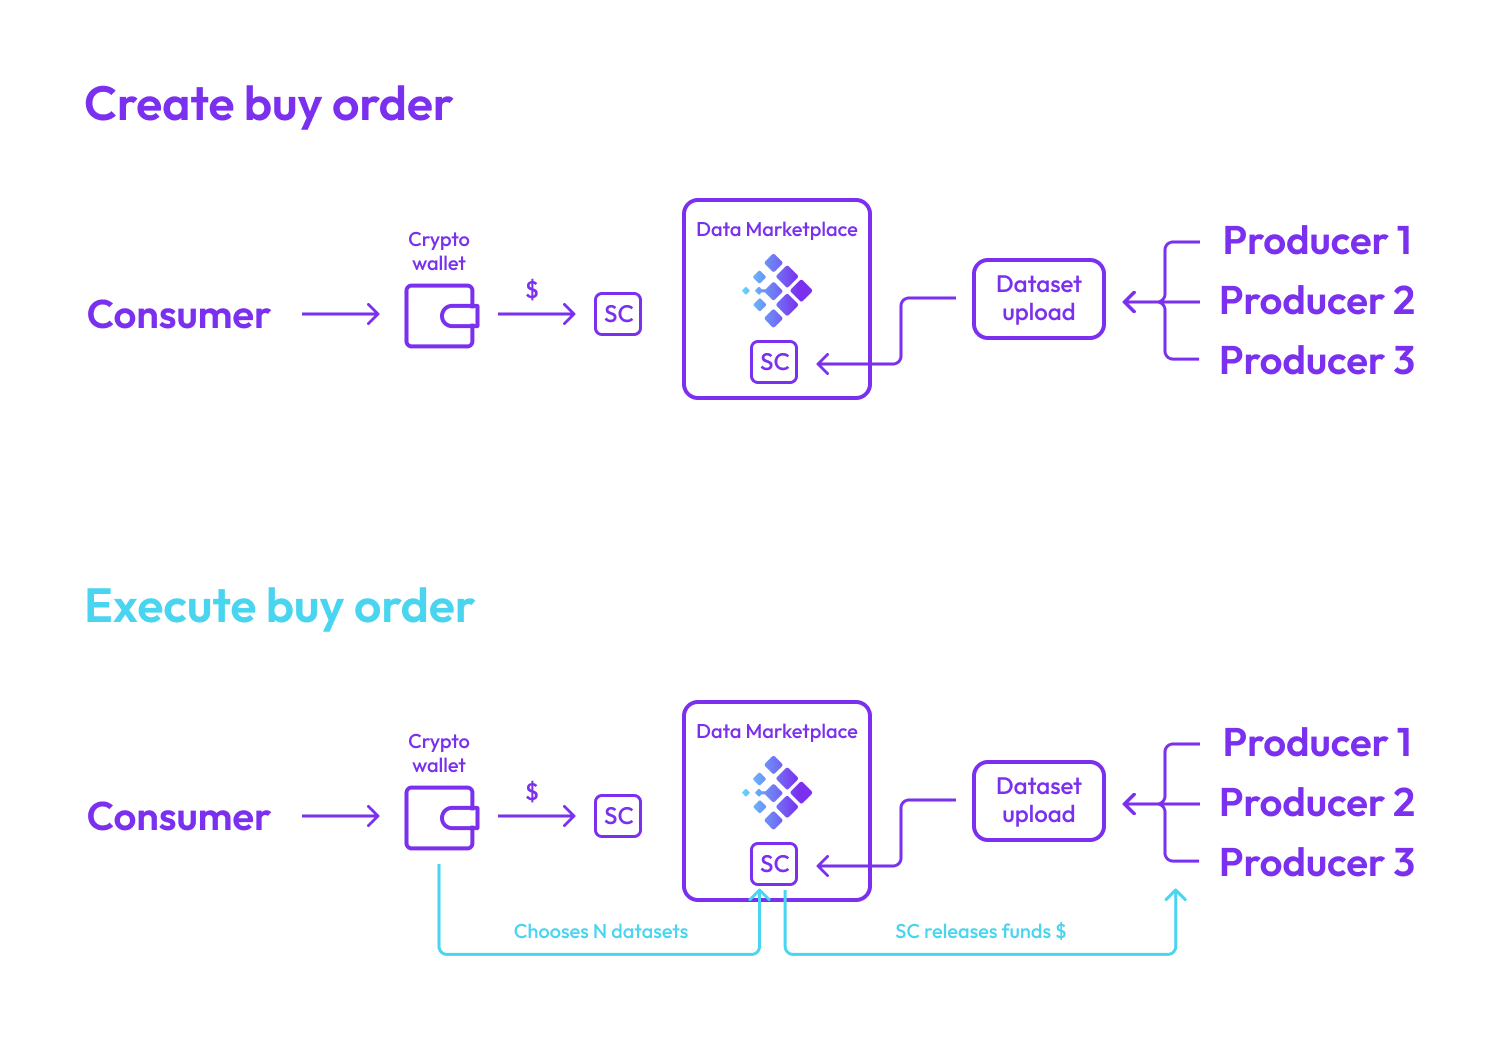 Upload and execute buy orders